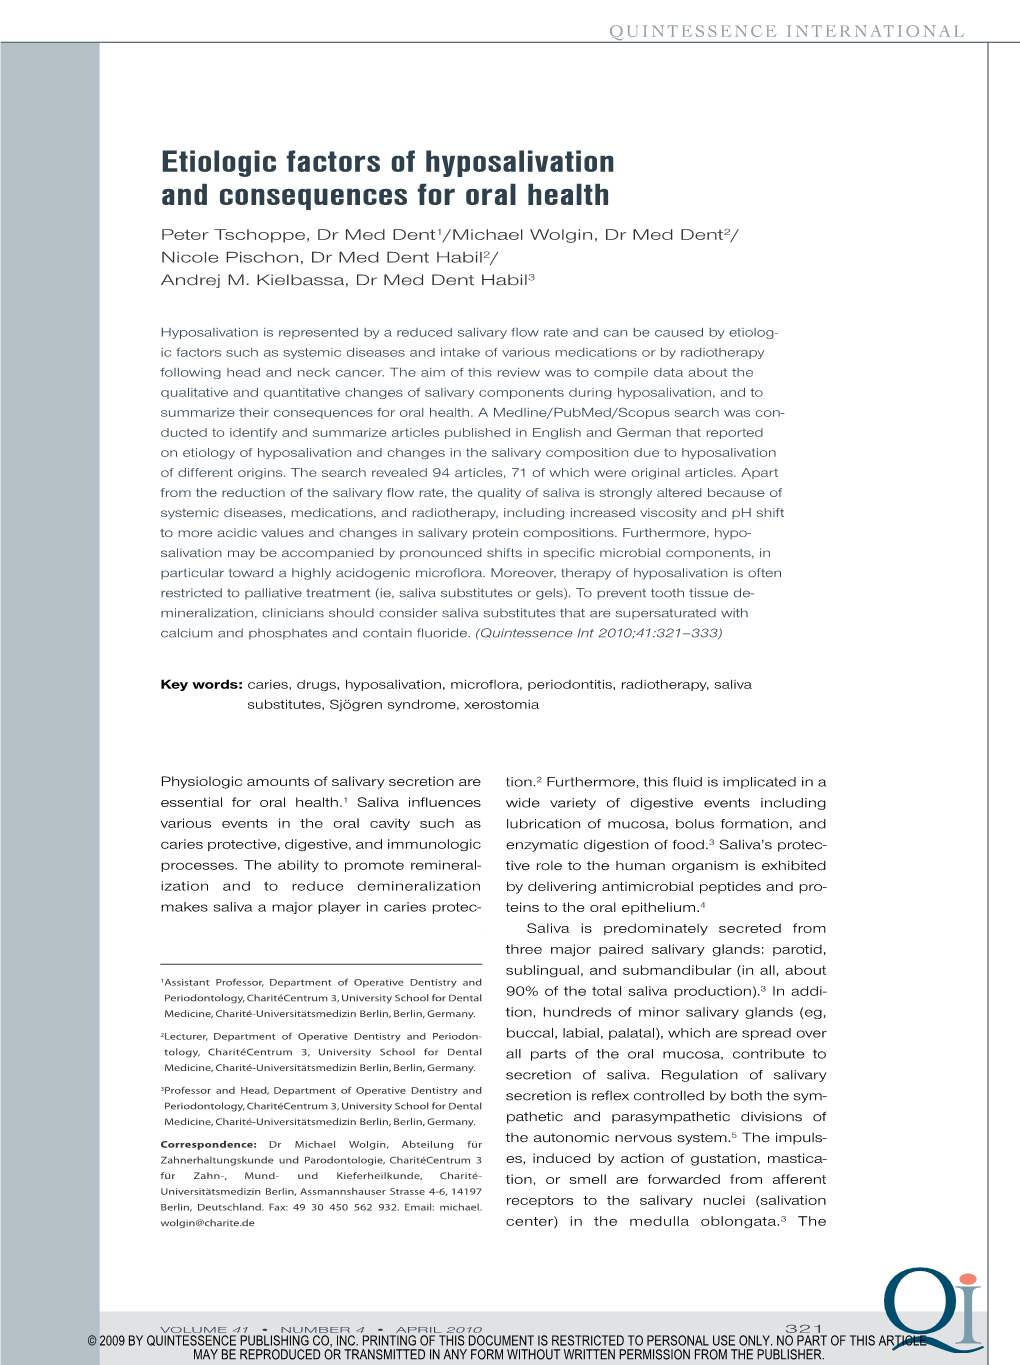 Etiologic Factors of Hyposalivation and Consequences for Oral Health